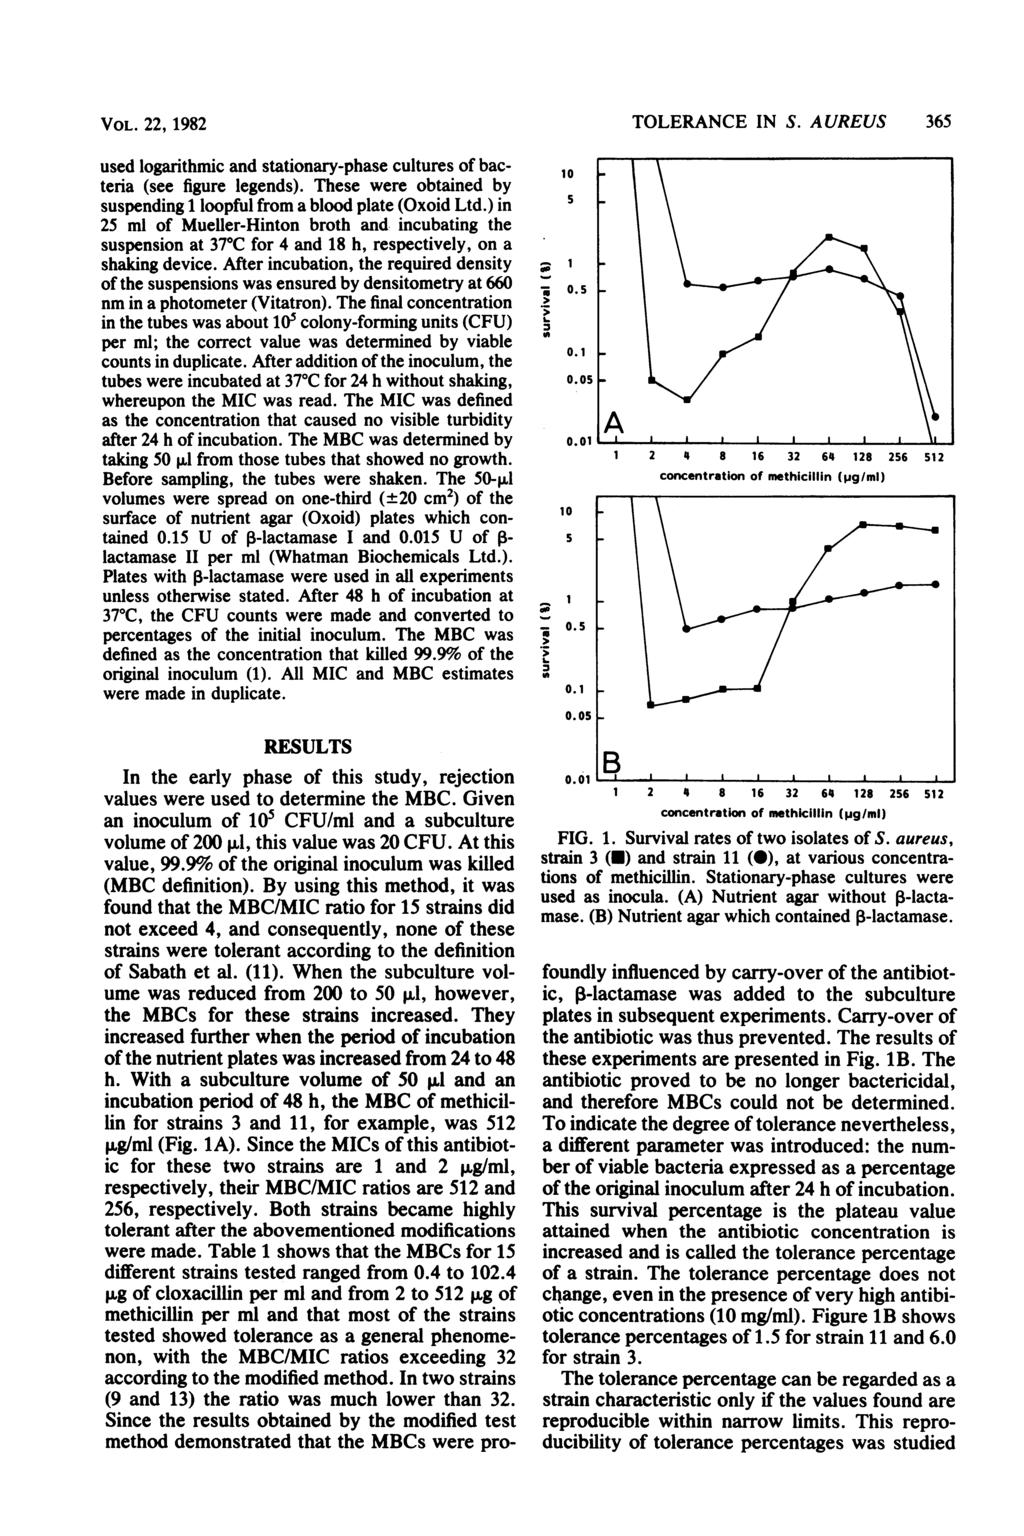 VOL. 22, 1982 used logarithmic and stationary-phase cultures of bacteria (see figure legends). These were obtained by suspending 1 loopful from a blood plate (Oxoid Ltd.